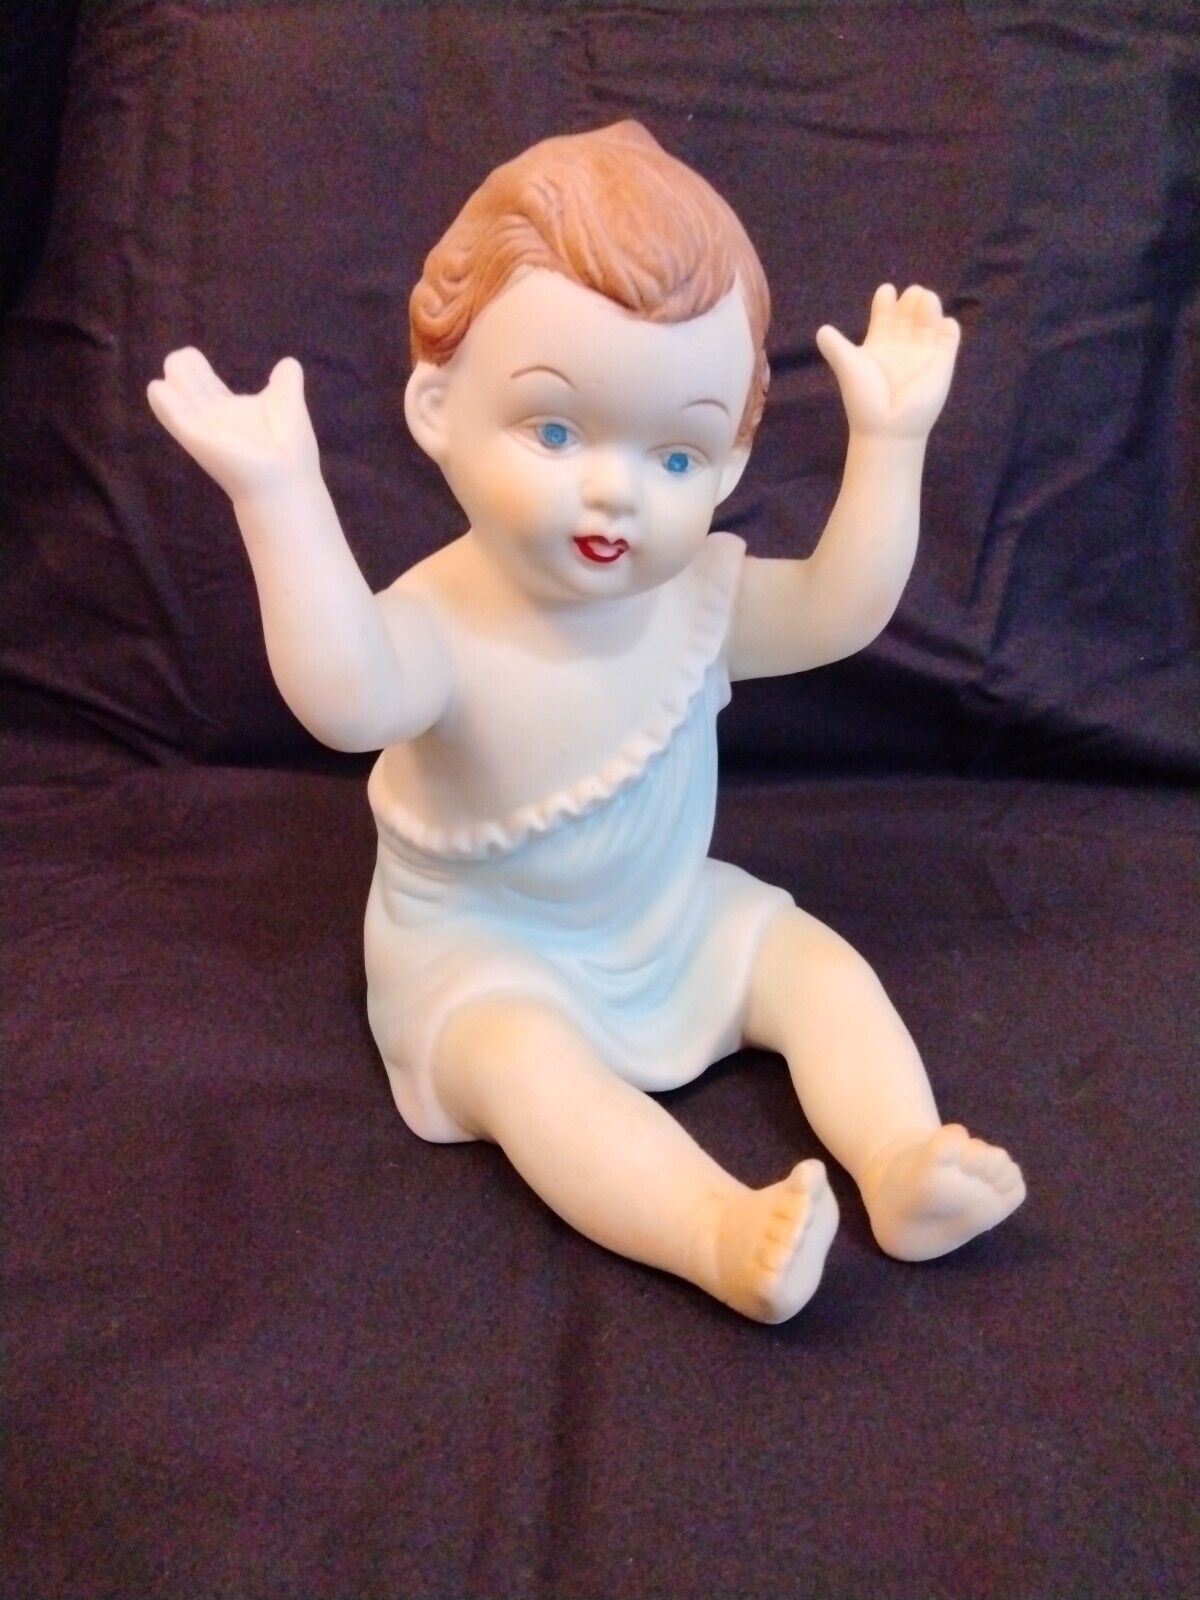 Vintage Artmark Bisque Porcelain Piano Baby 7” Inches